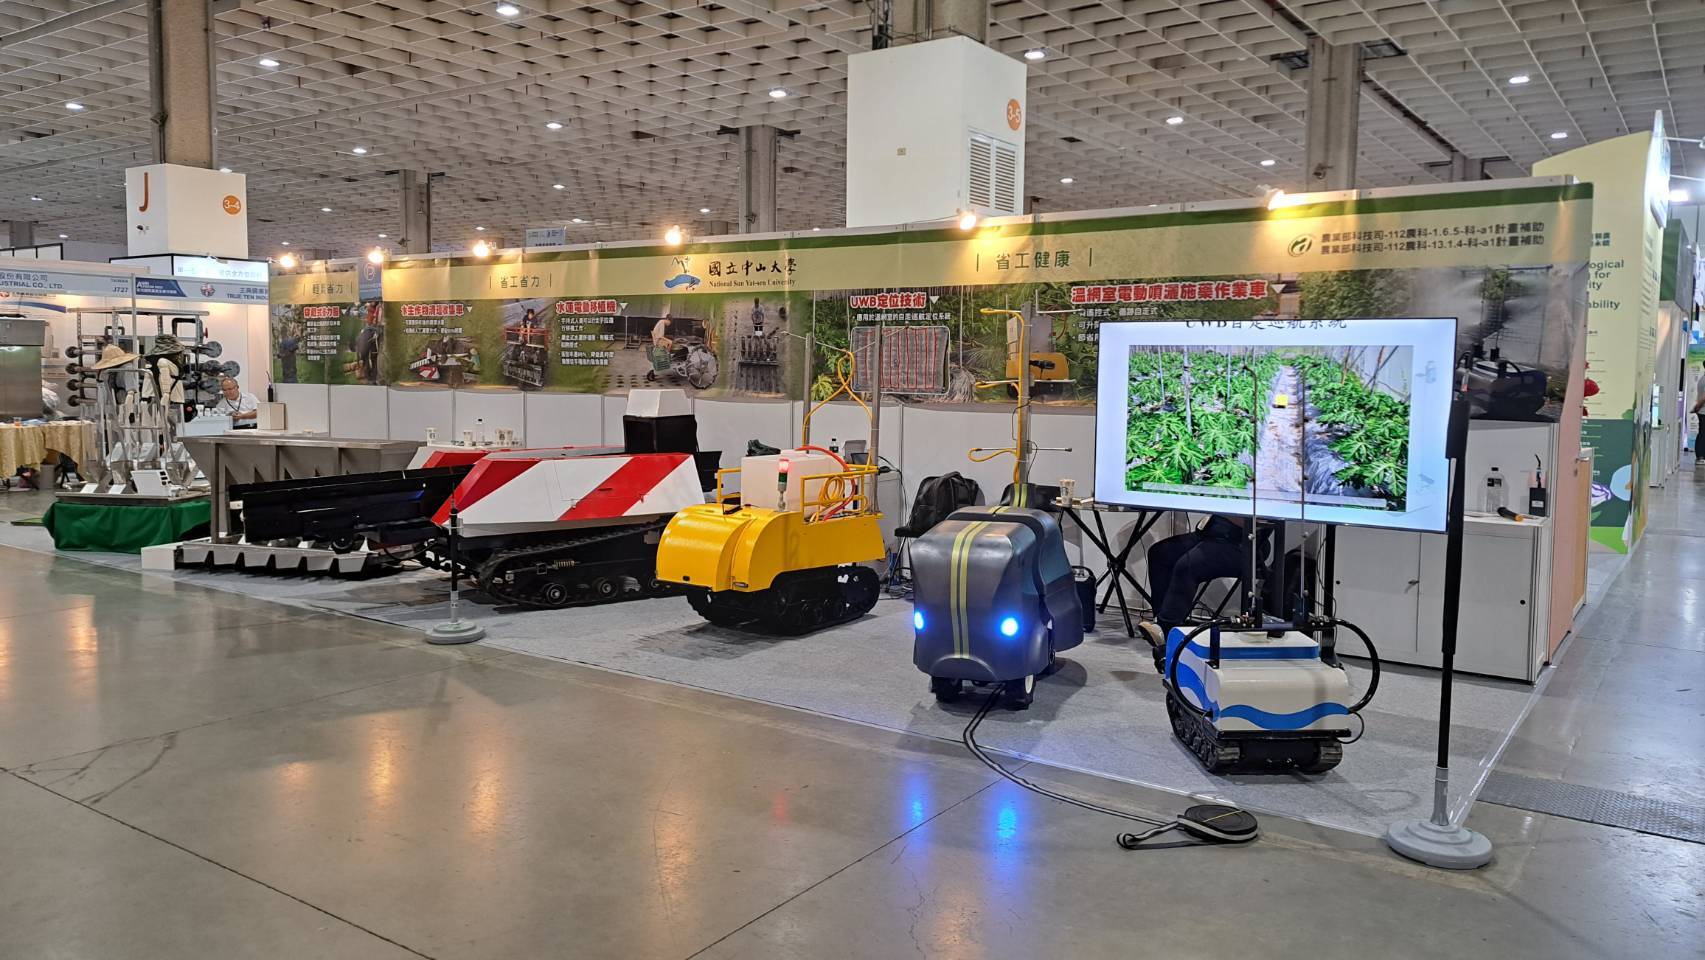 NSYSU exhibited smart agricultural machinery such as AI automatic spraying vehicles (the yellow machinery in the picture).